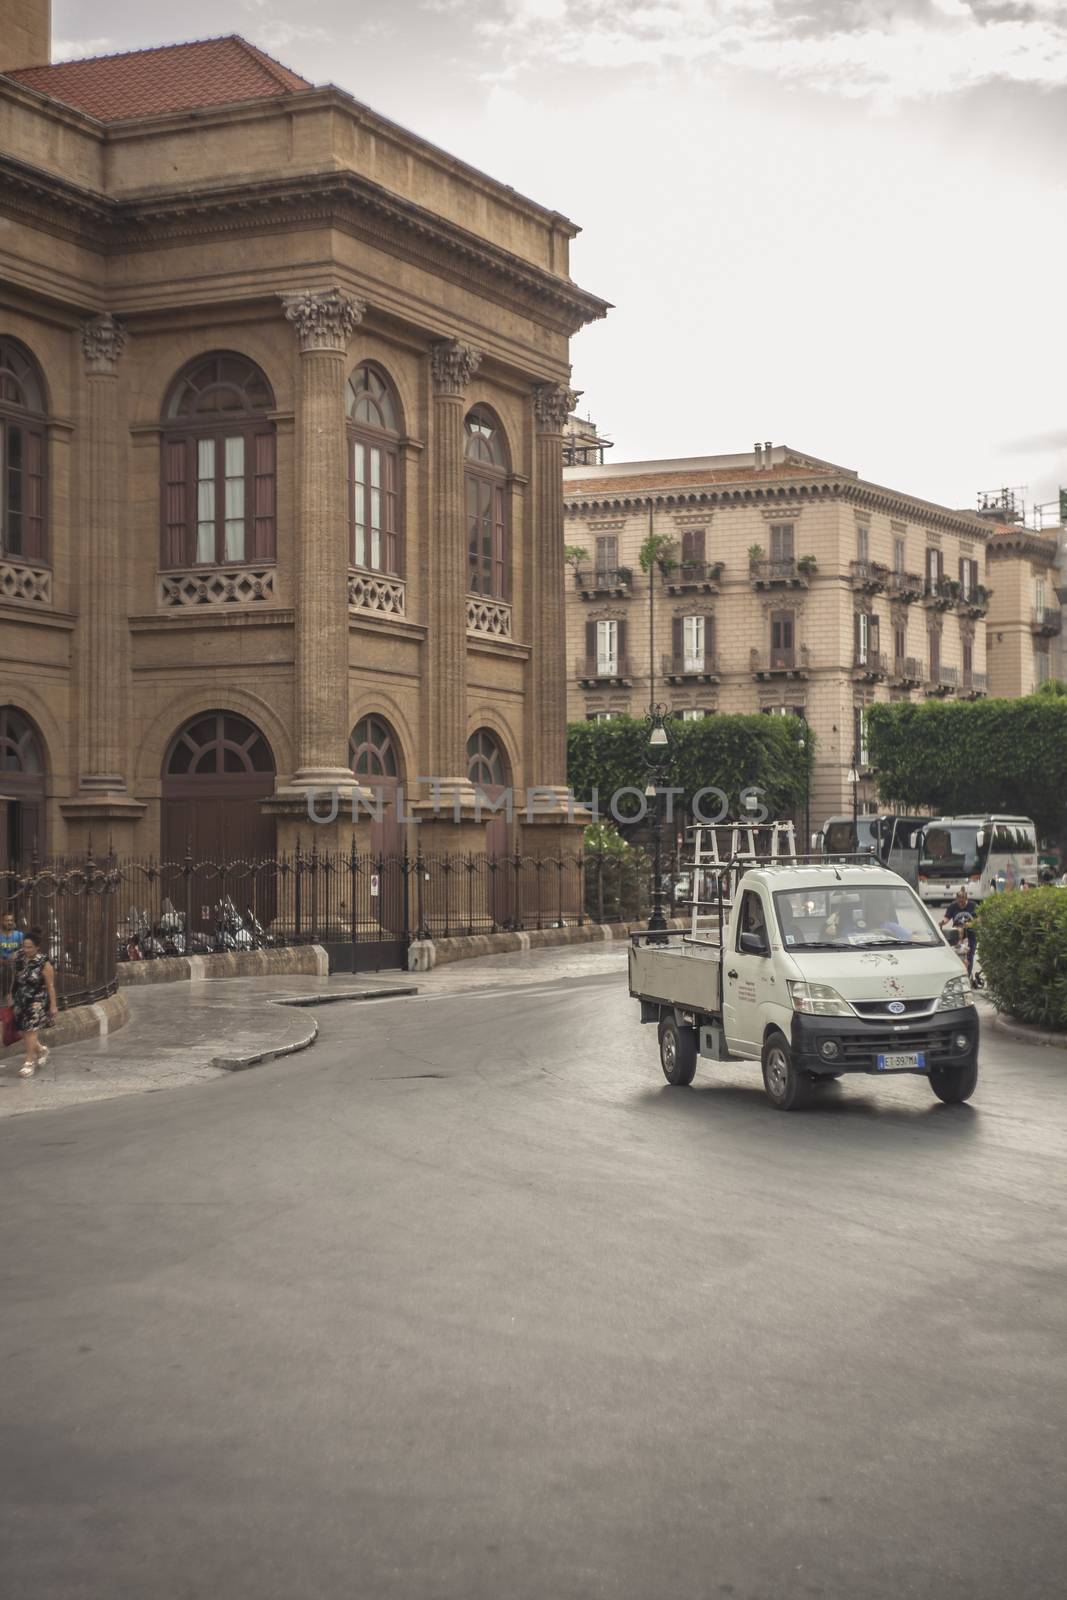 The Teatro Massimo Vittorio Emanuele, better known as Teatro Massimo, of Palermo is the largest opera theater building in Italy, and one of the largest in Europe, third by architectural magnitude